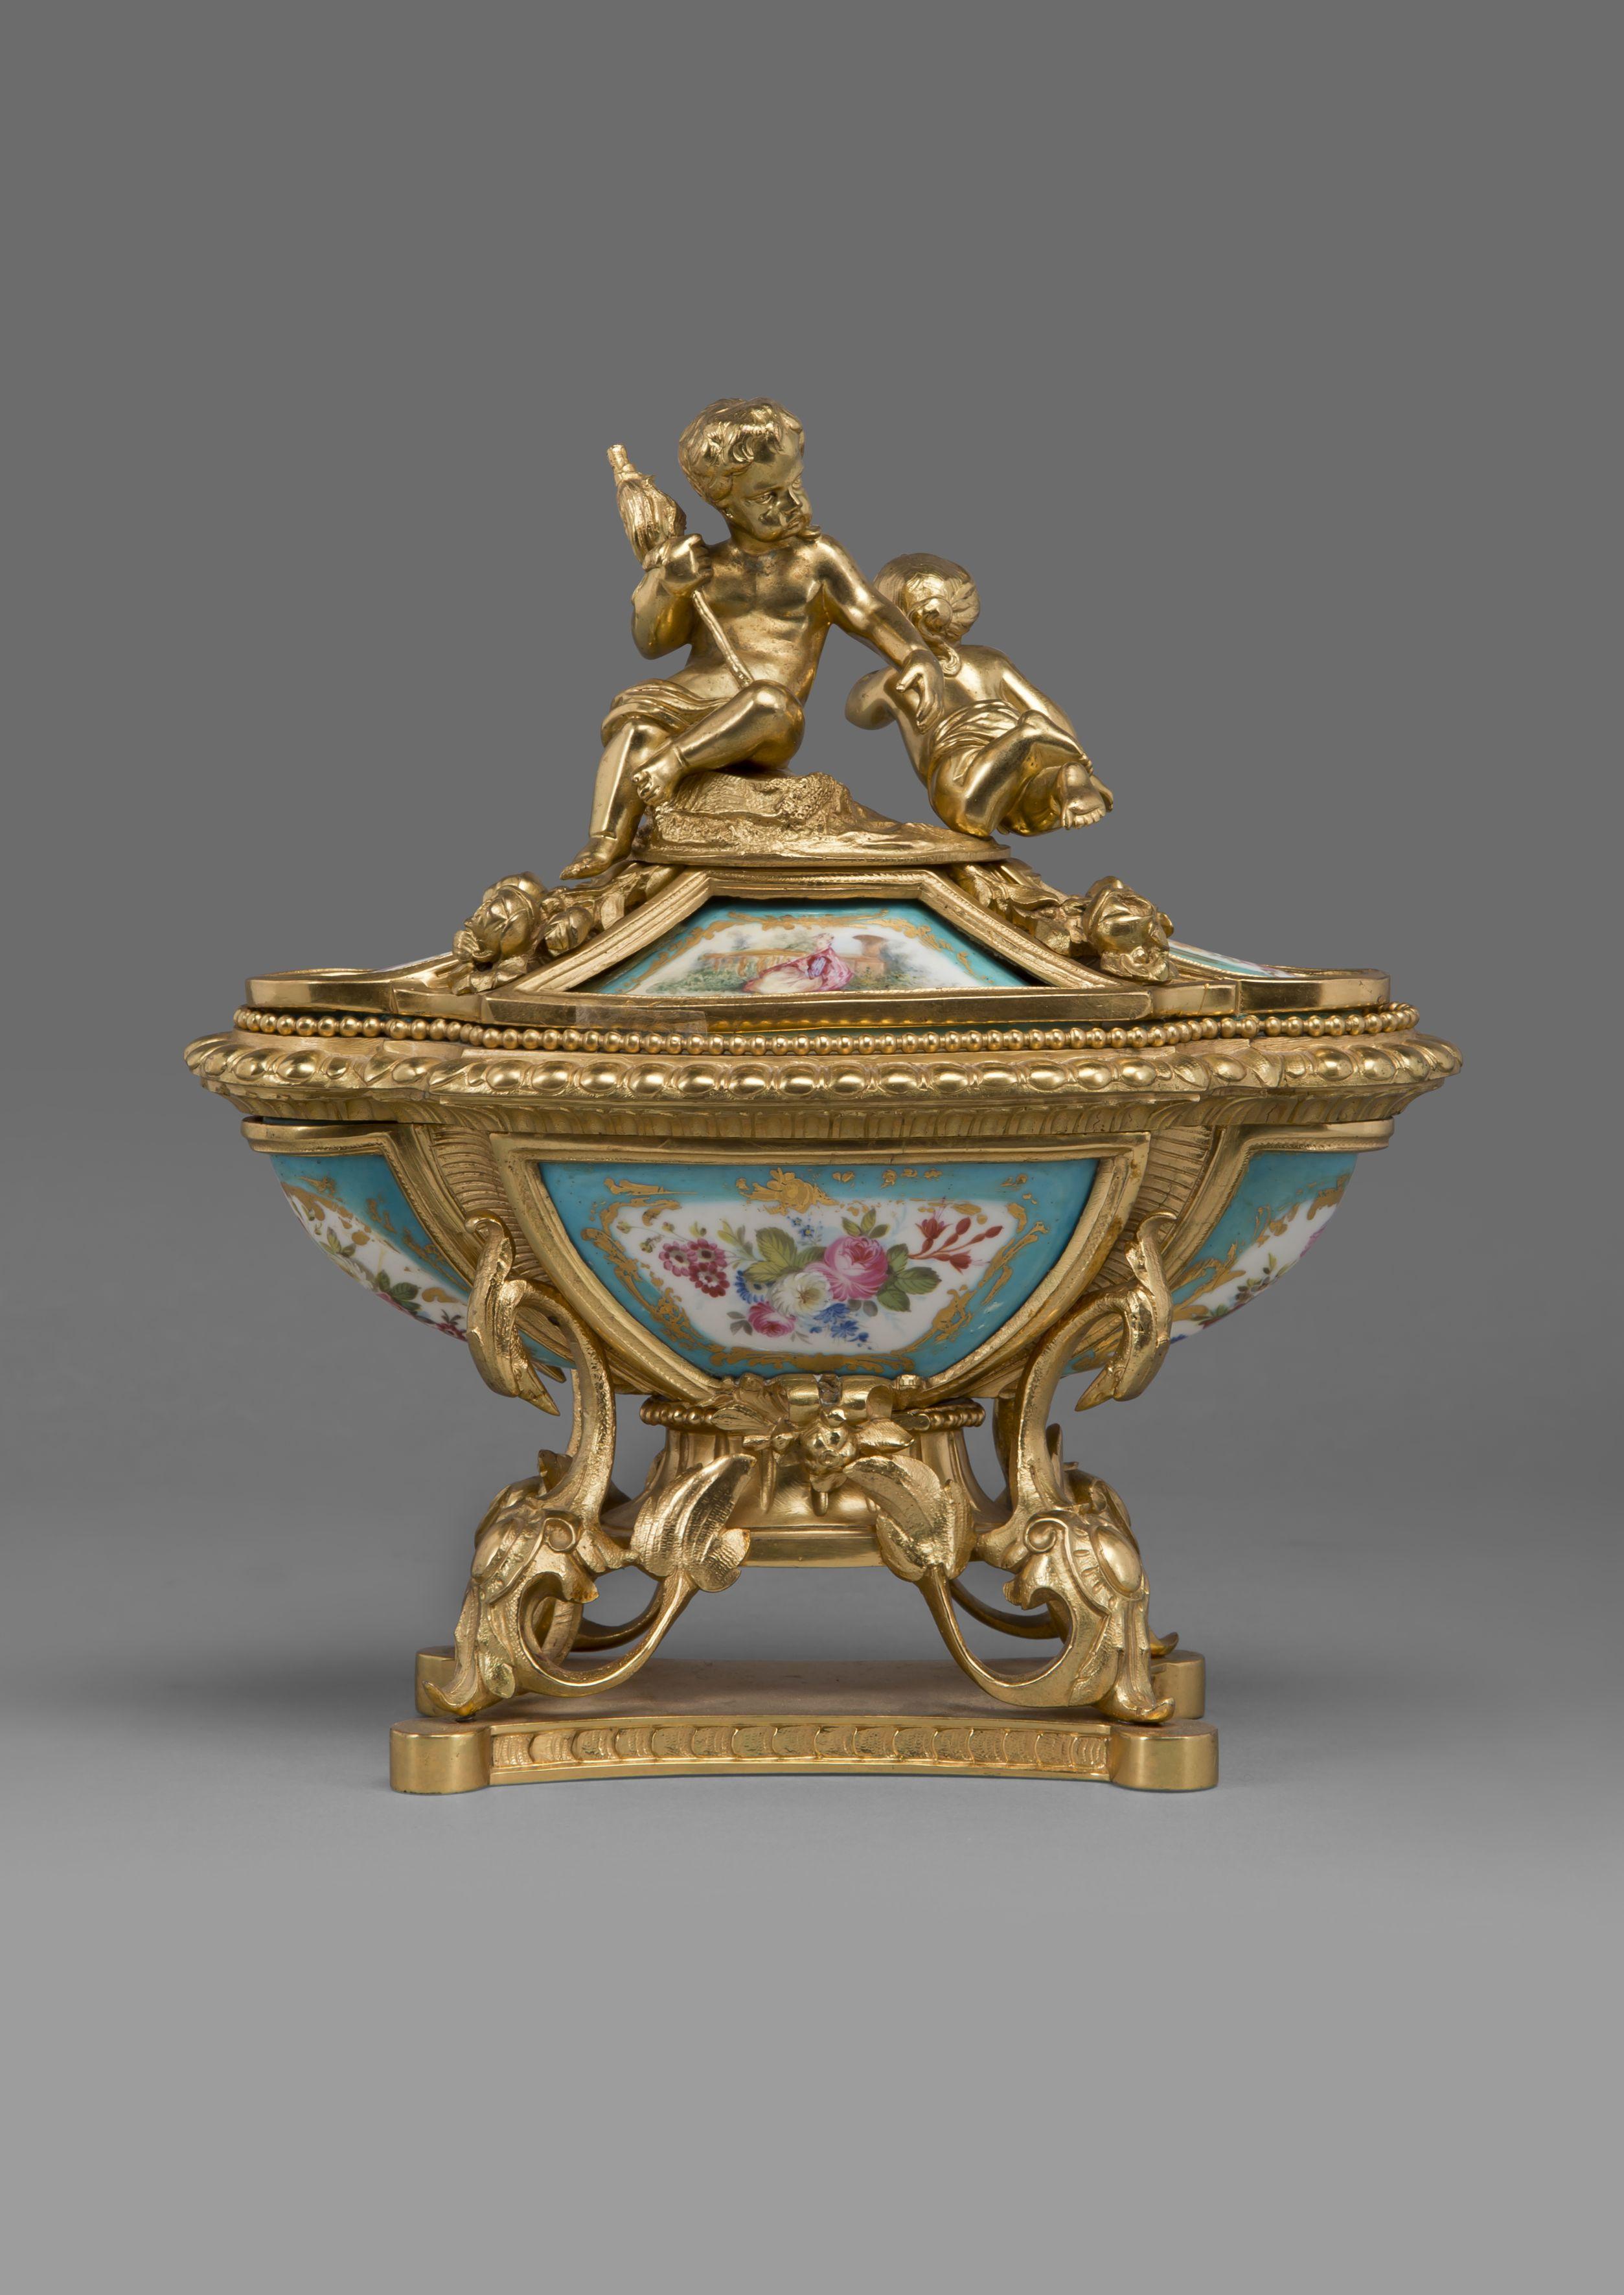 A fine Louis XV Style gilt bronze and Sèvres style Porcelain inkwell.

French, circa 1890. 

This elegant and sophisticated inkwell is of sarcophagus form with finely painted porcelain panels depicting la fête champêtre and foliate sprays, the